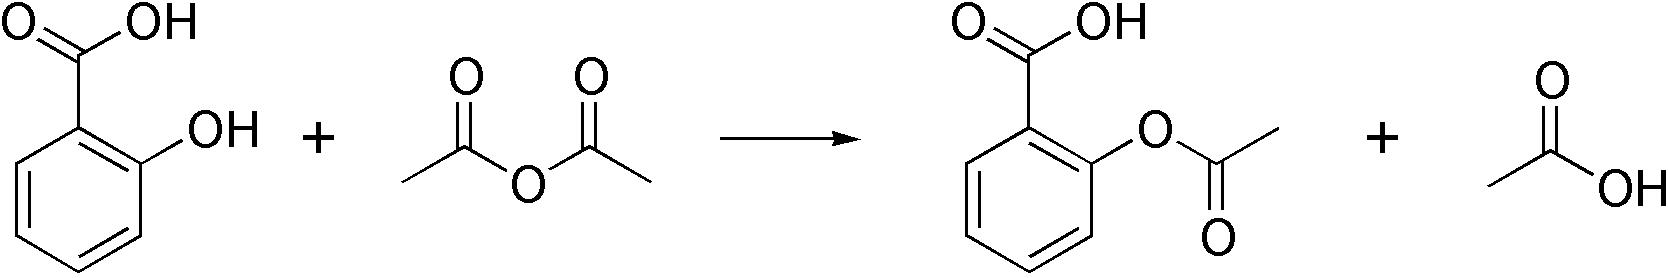   . The synthesis of acetylsalicylic acid